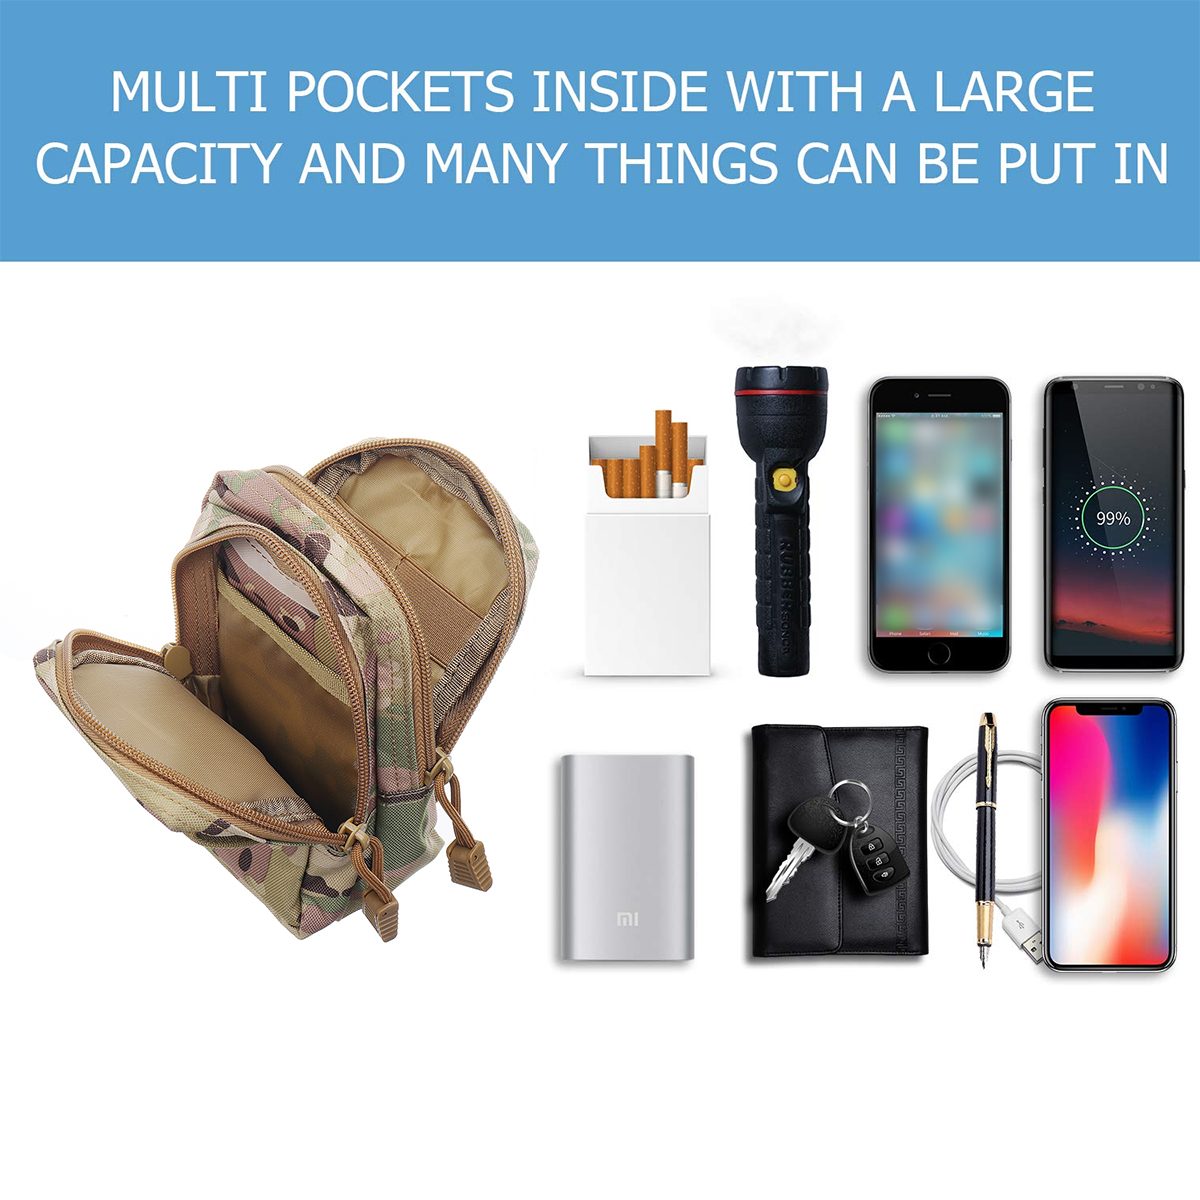 6-Inch-Tactical-Molle-Pouch-Waist-Bag-Phone-Bag-For-Outdoor-Sports-Hiking-Climbing-1524899-3